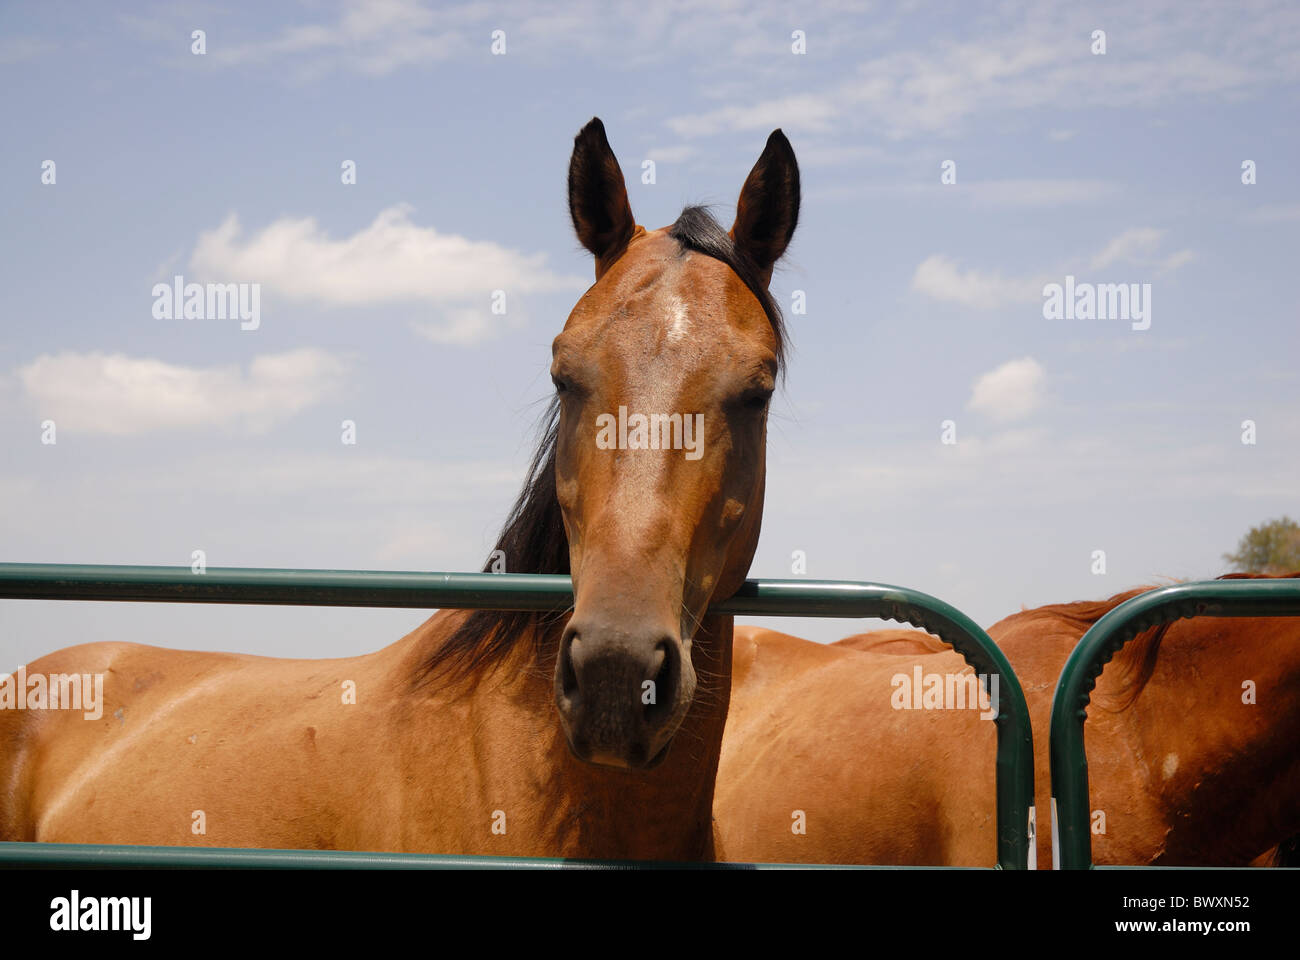 A beautiful brown horse standing behind gate on sunny day Stock Photo